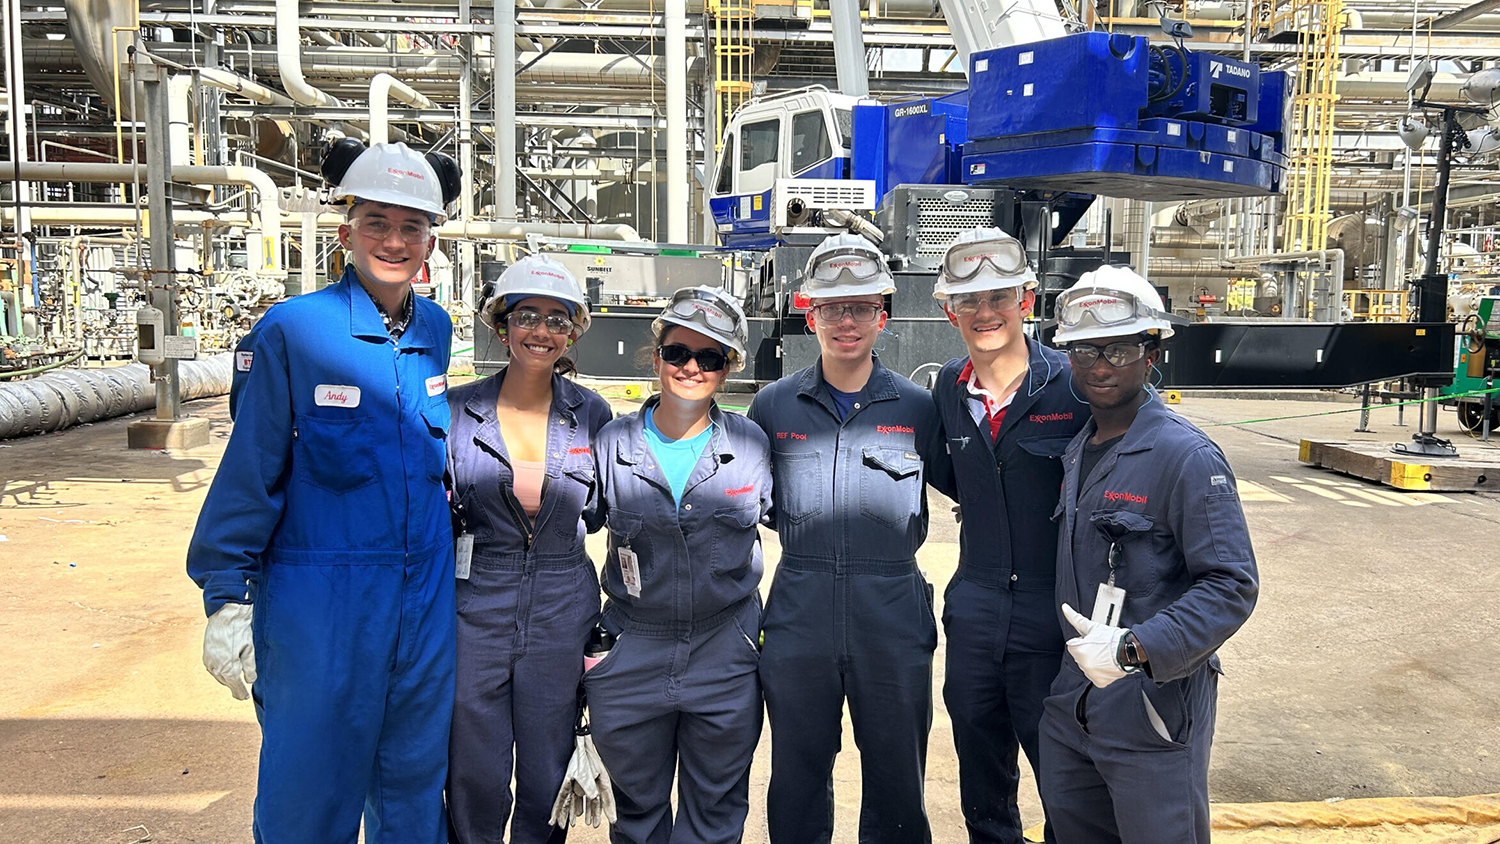 Tyler Void '23 (far right) at the site of his ExxonMobil internship.